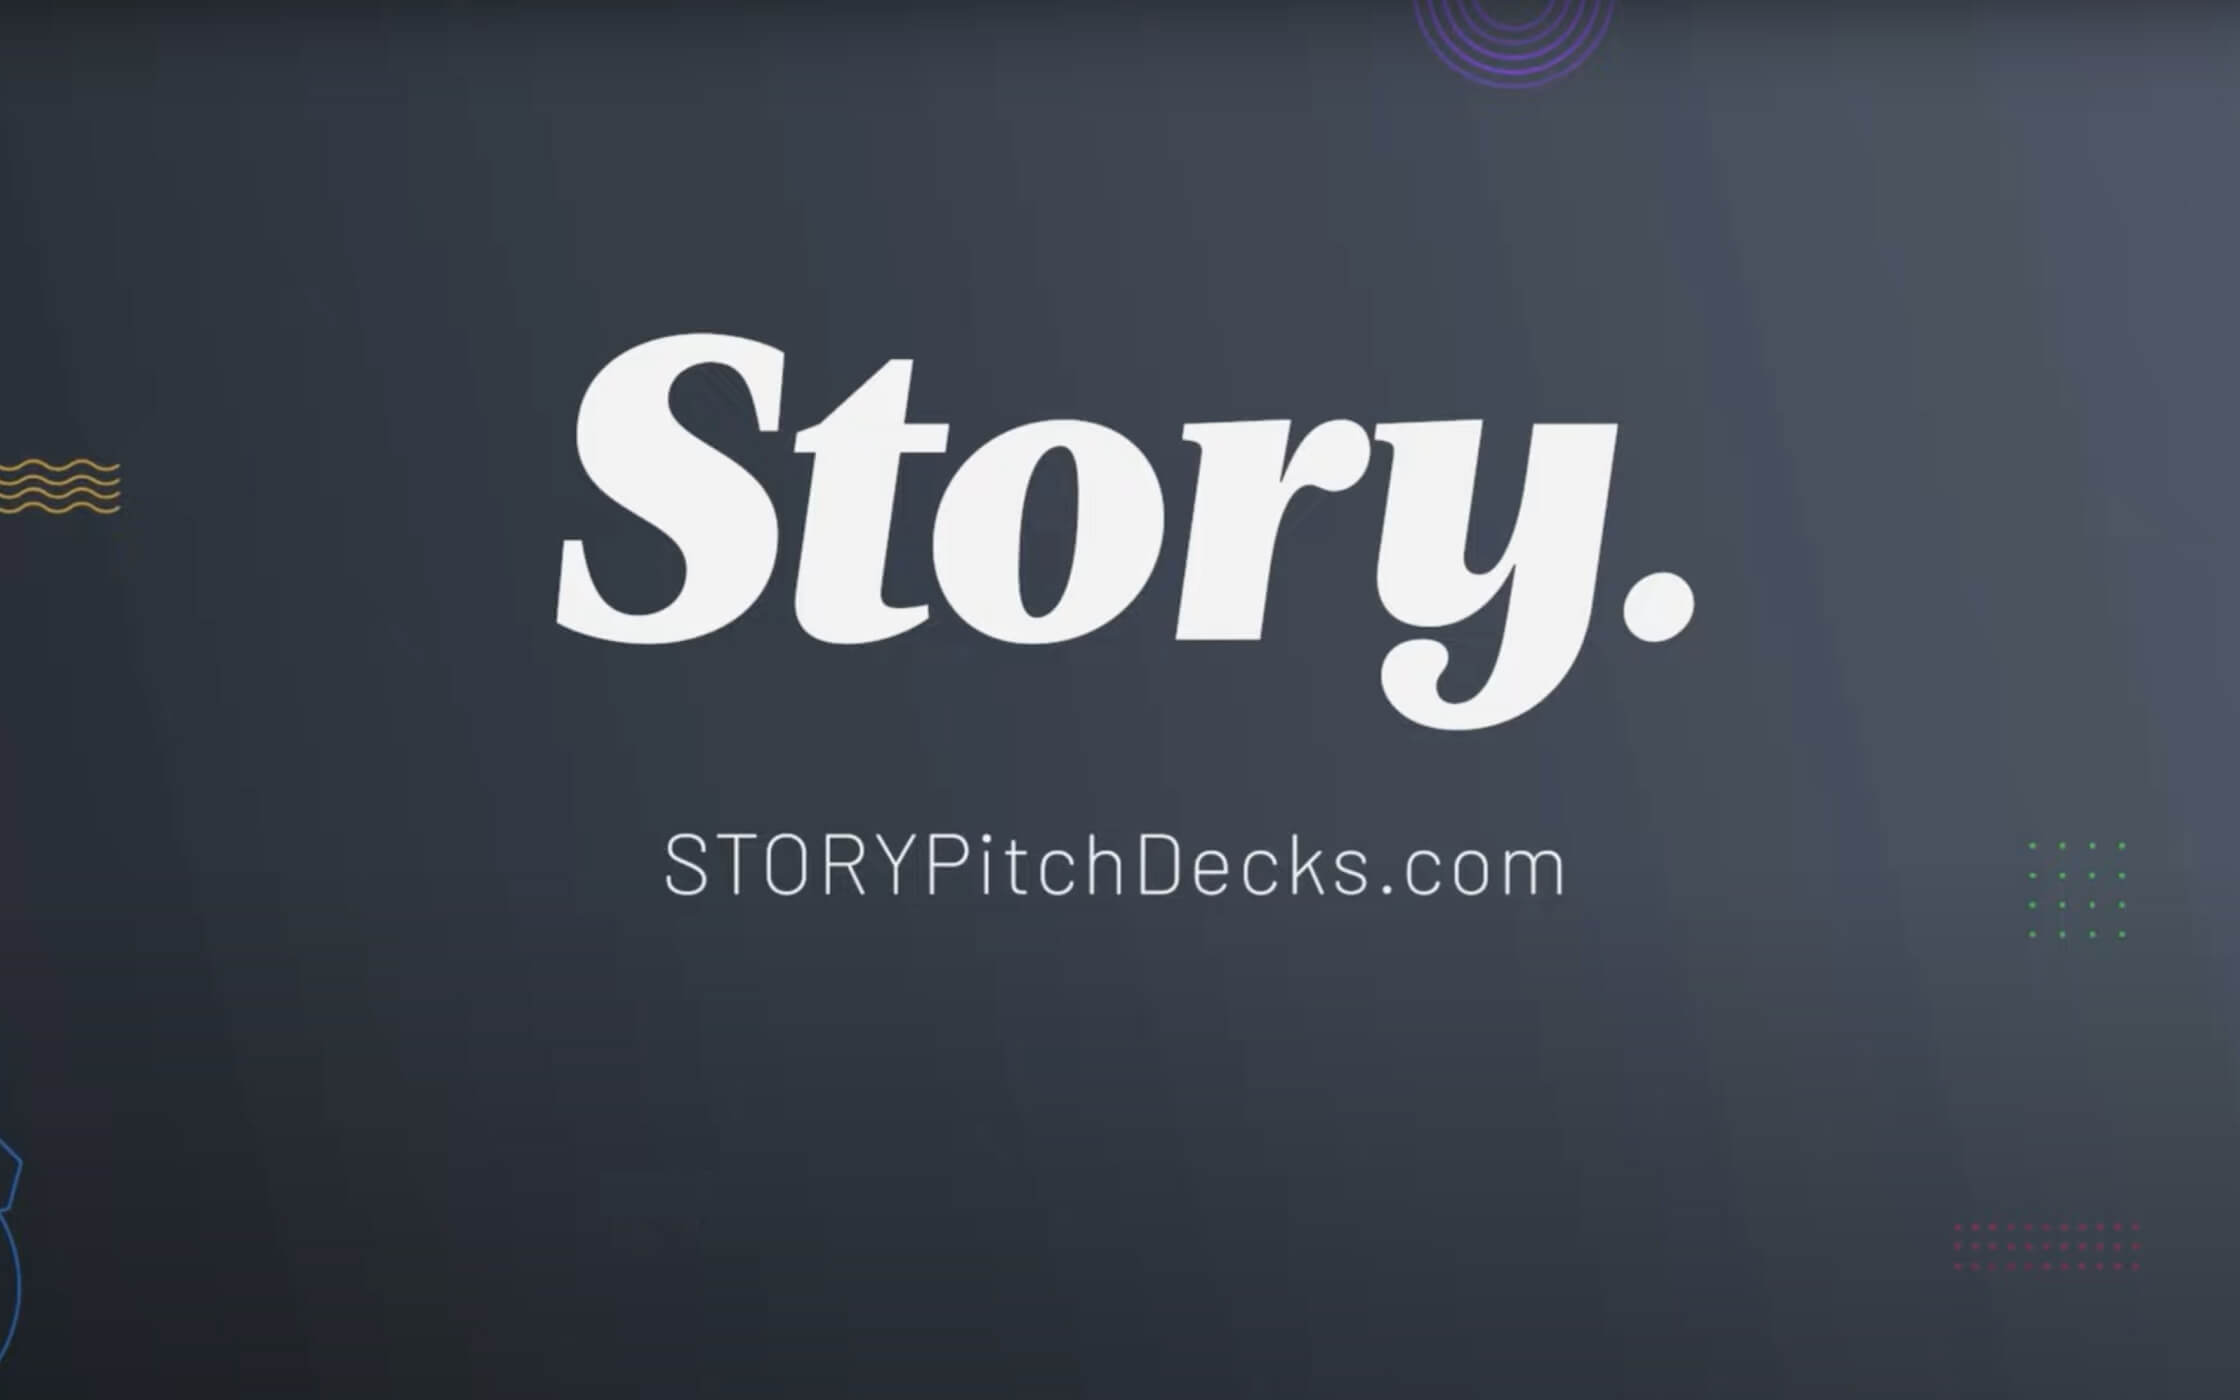 The word "Story" in large white lettering.